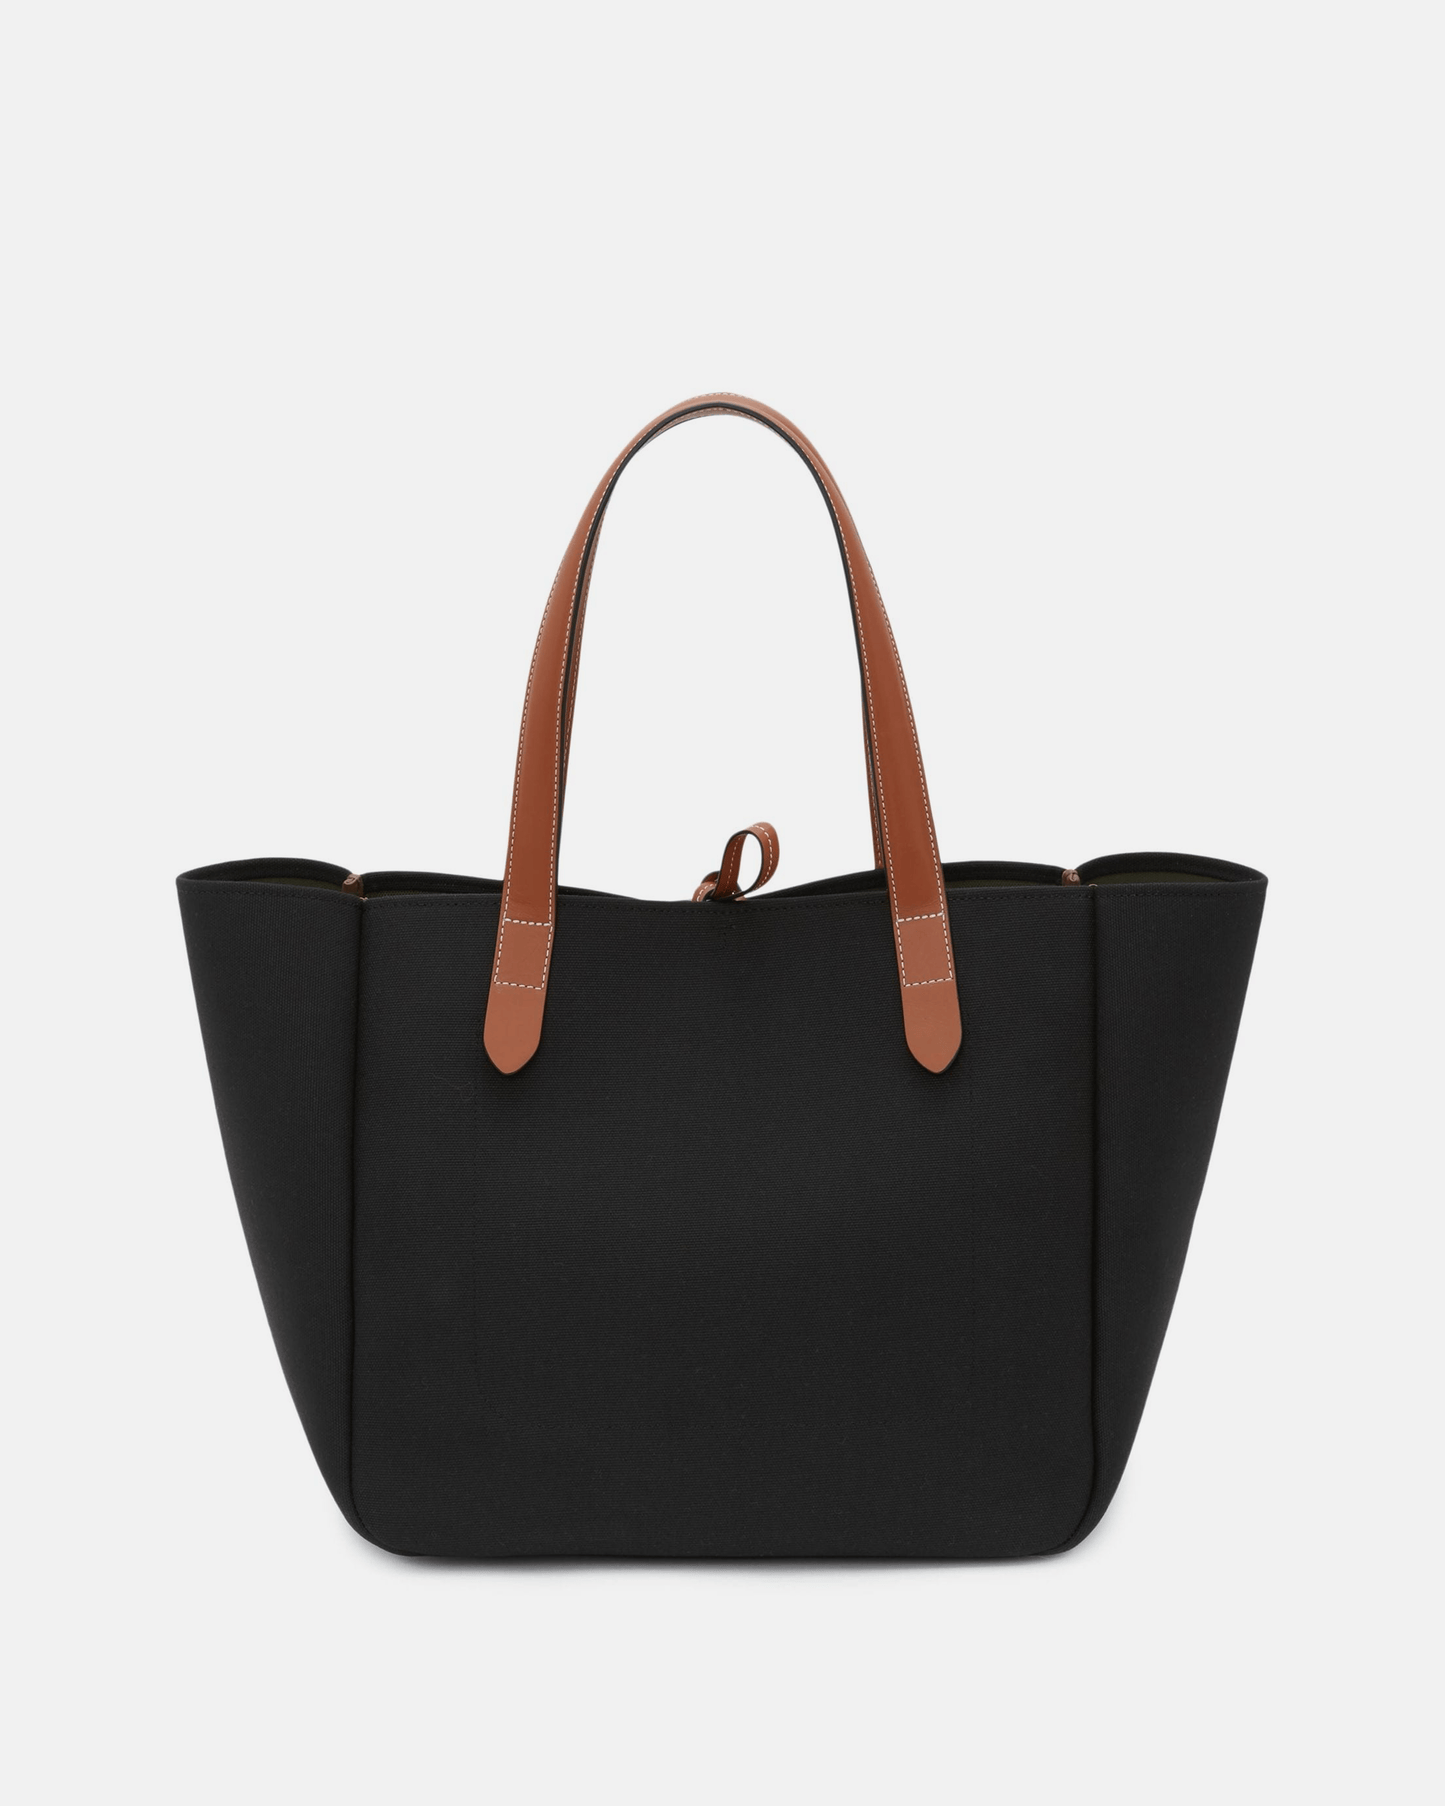 JW Anderson Men's Bags Recycled Canvas Belt Tote in Black